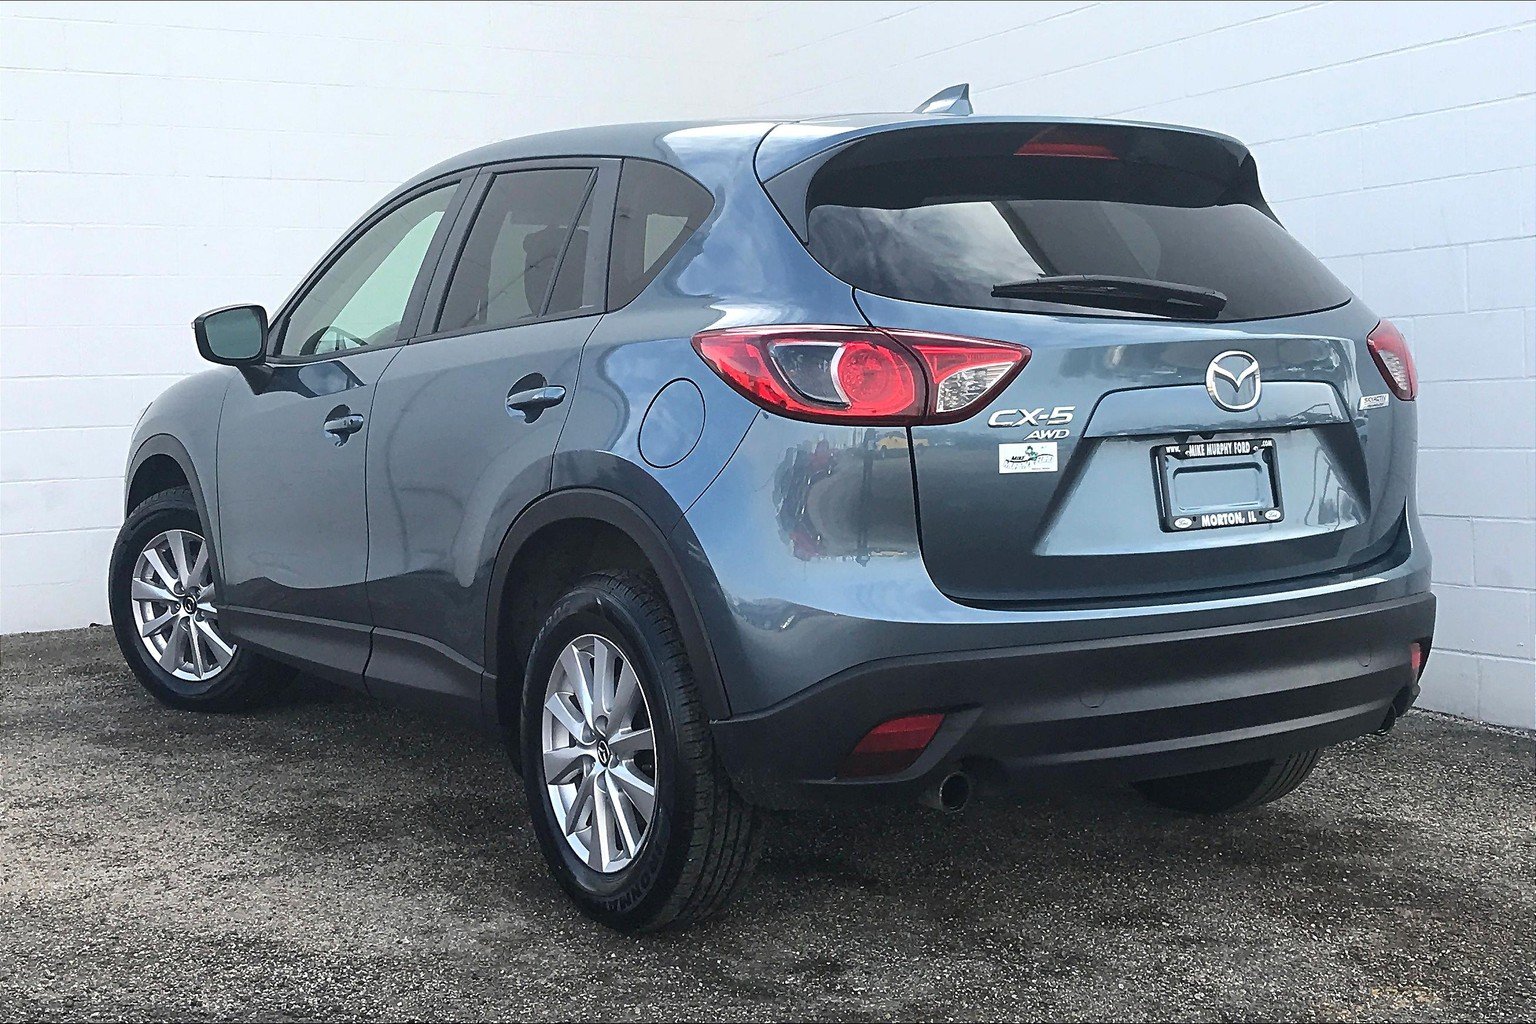 PreOwned 2016 Mazda CX5 2016.5 AWD 4dr Auto Touring 4D